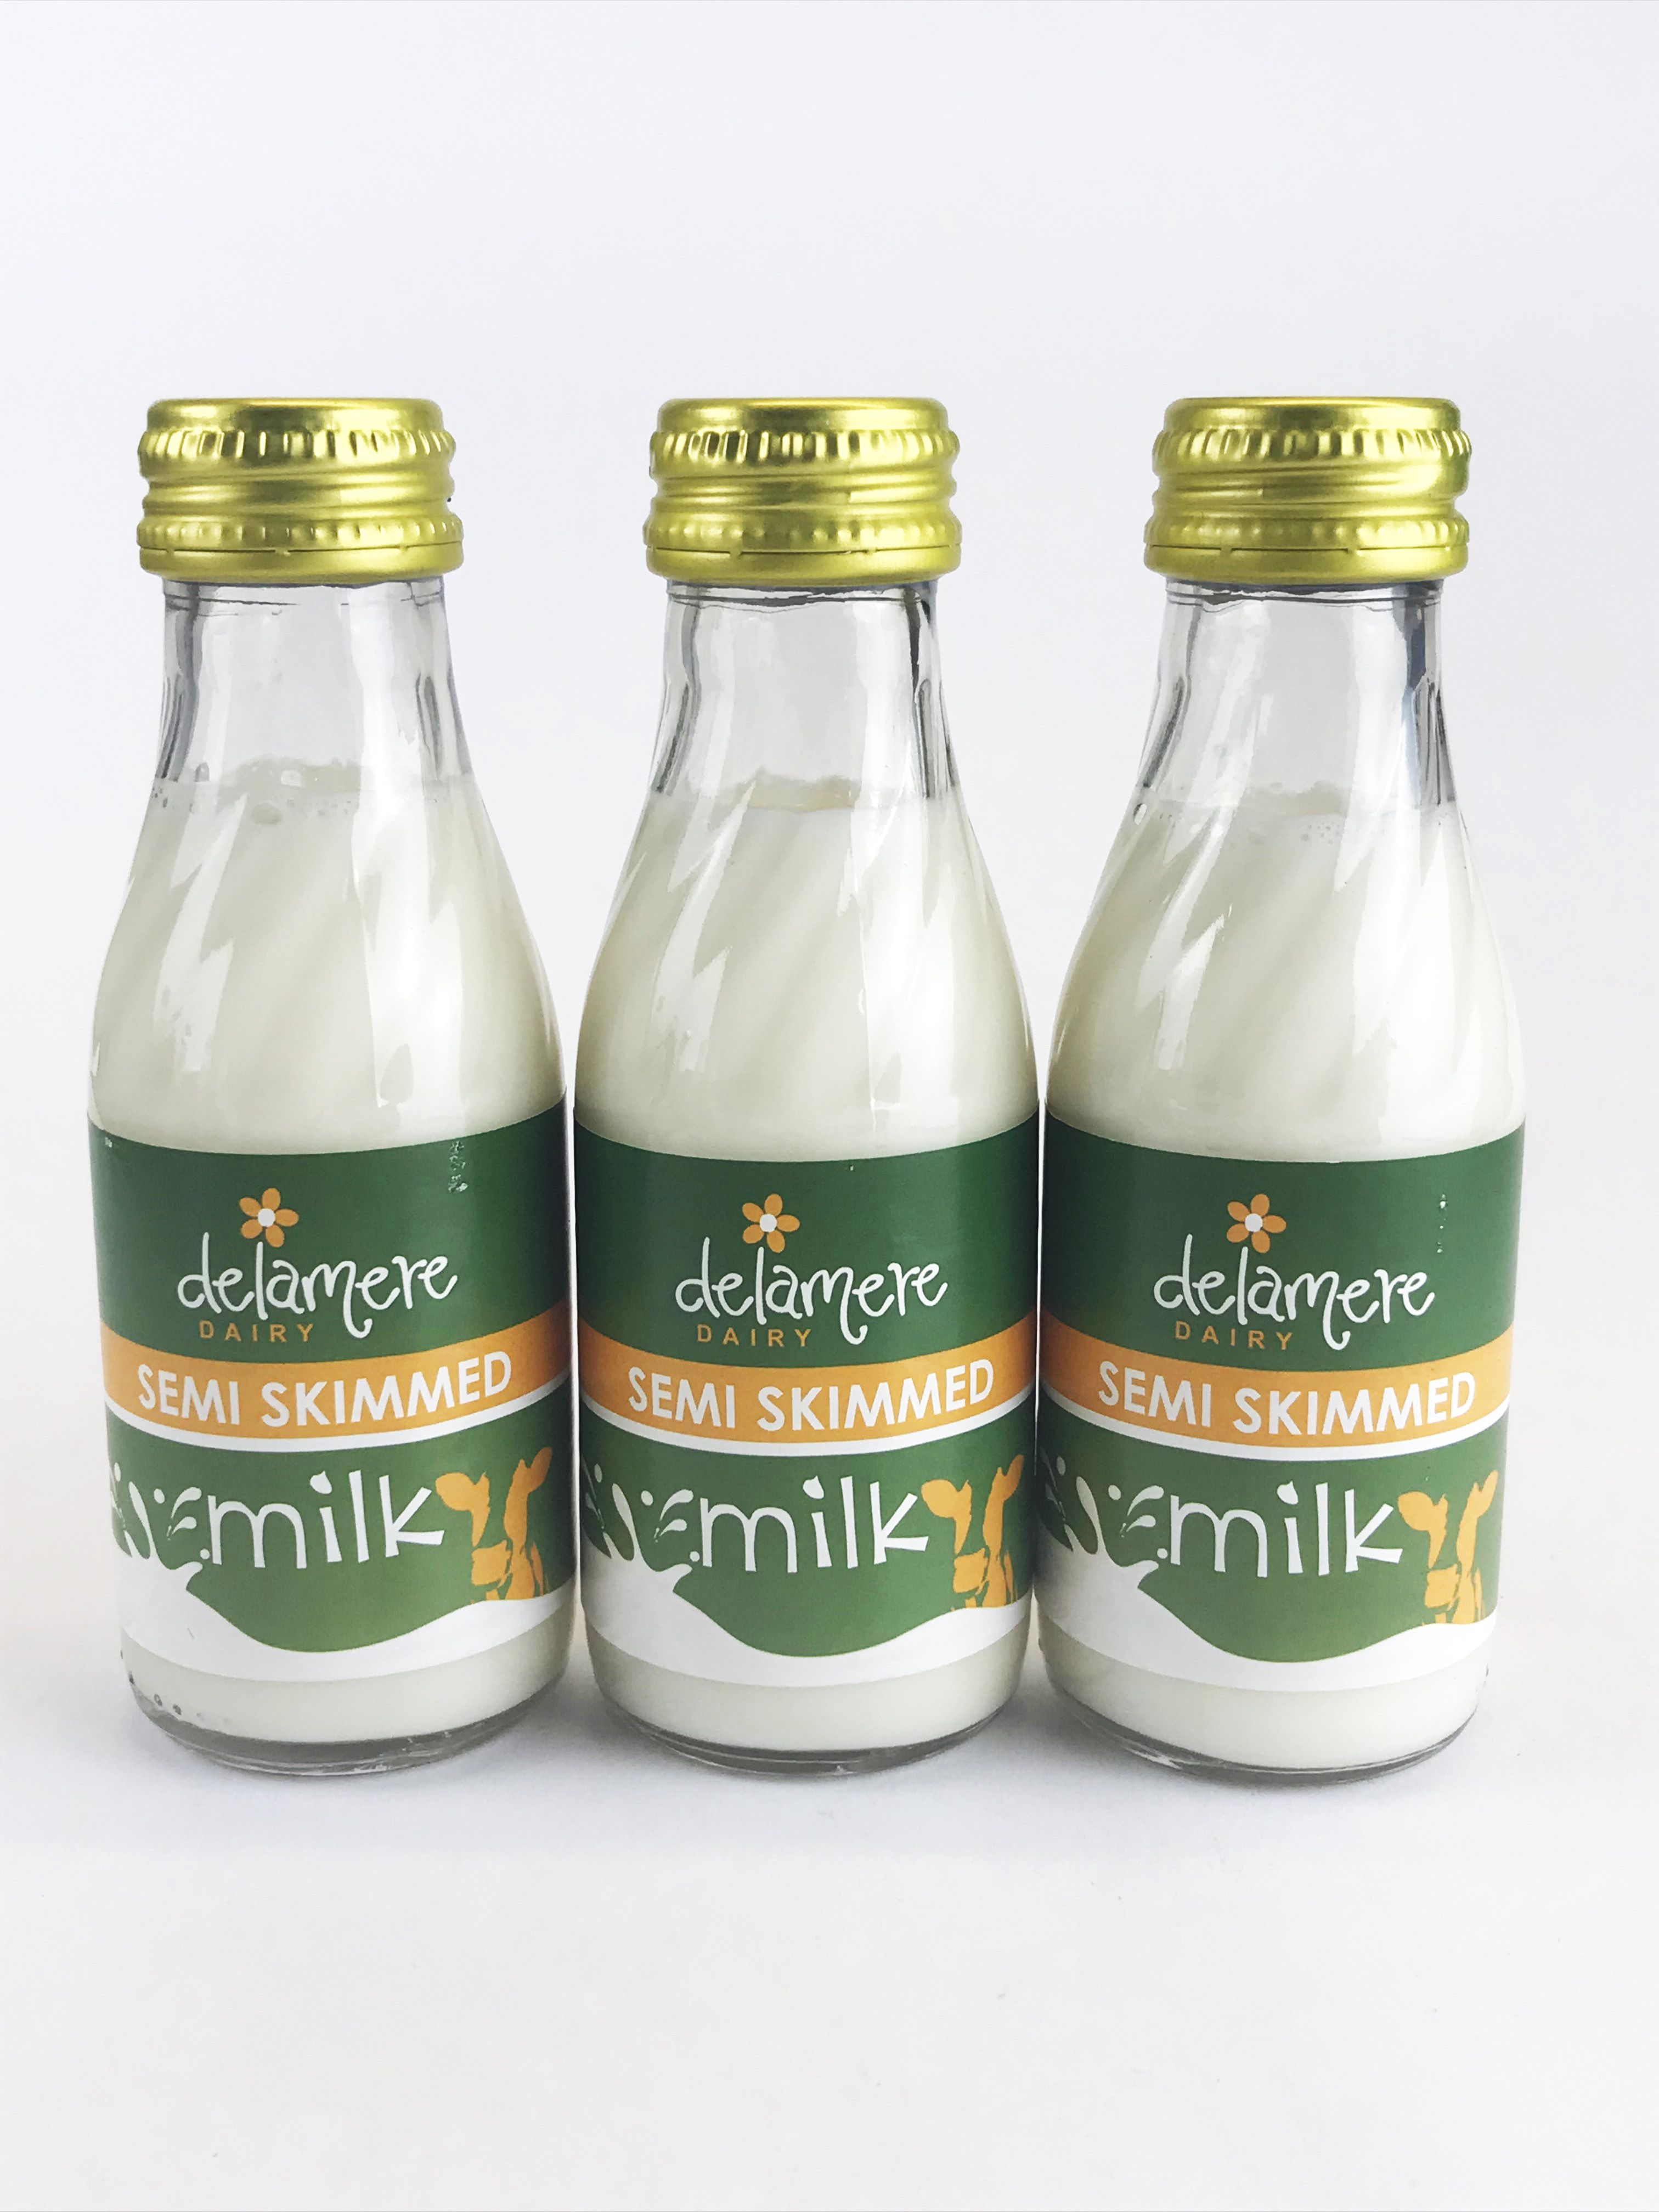 97ml long life cows' milk for the hospitality sector